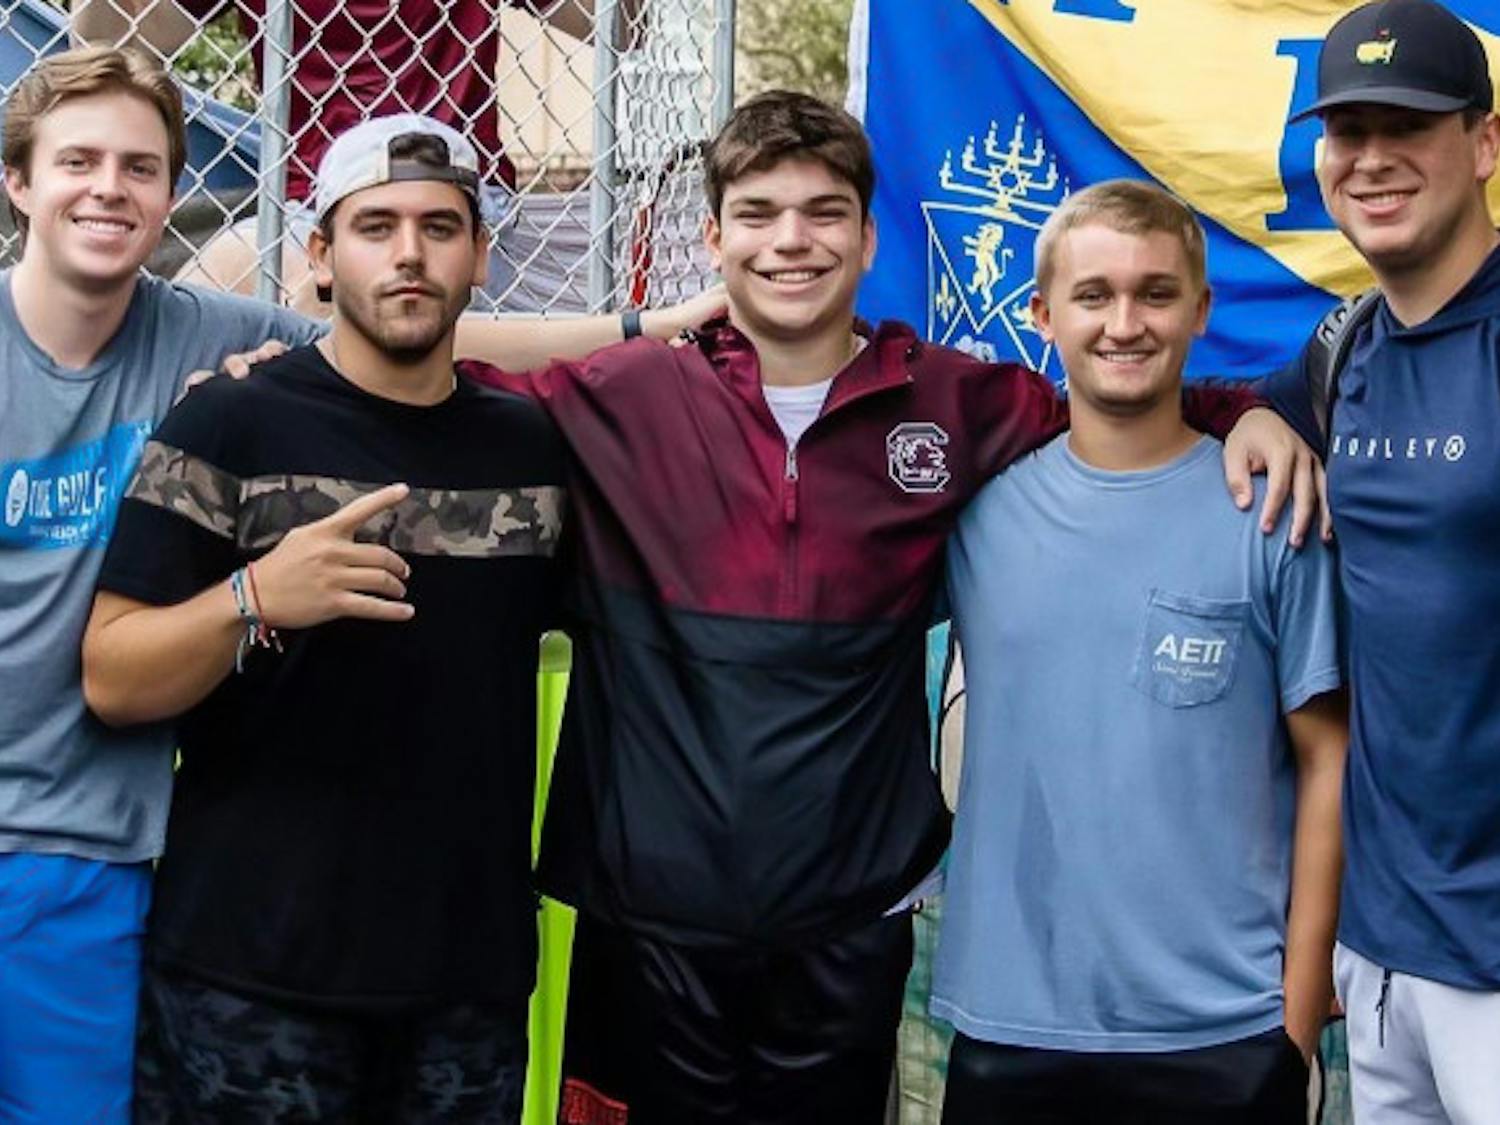 Alpha Epsilon Pi (AEPi) developed "Good and Welfare" to support mental health for members of the fraternity.